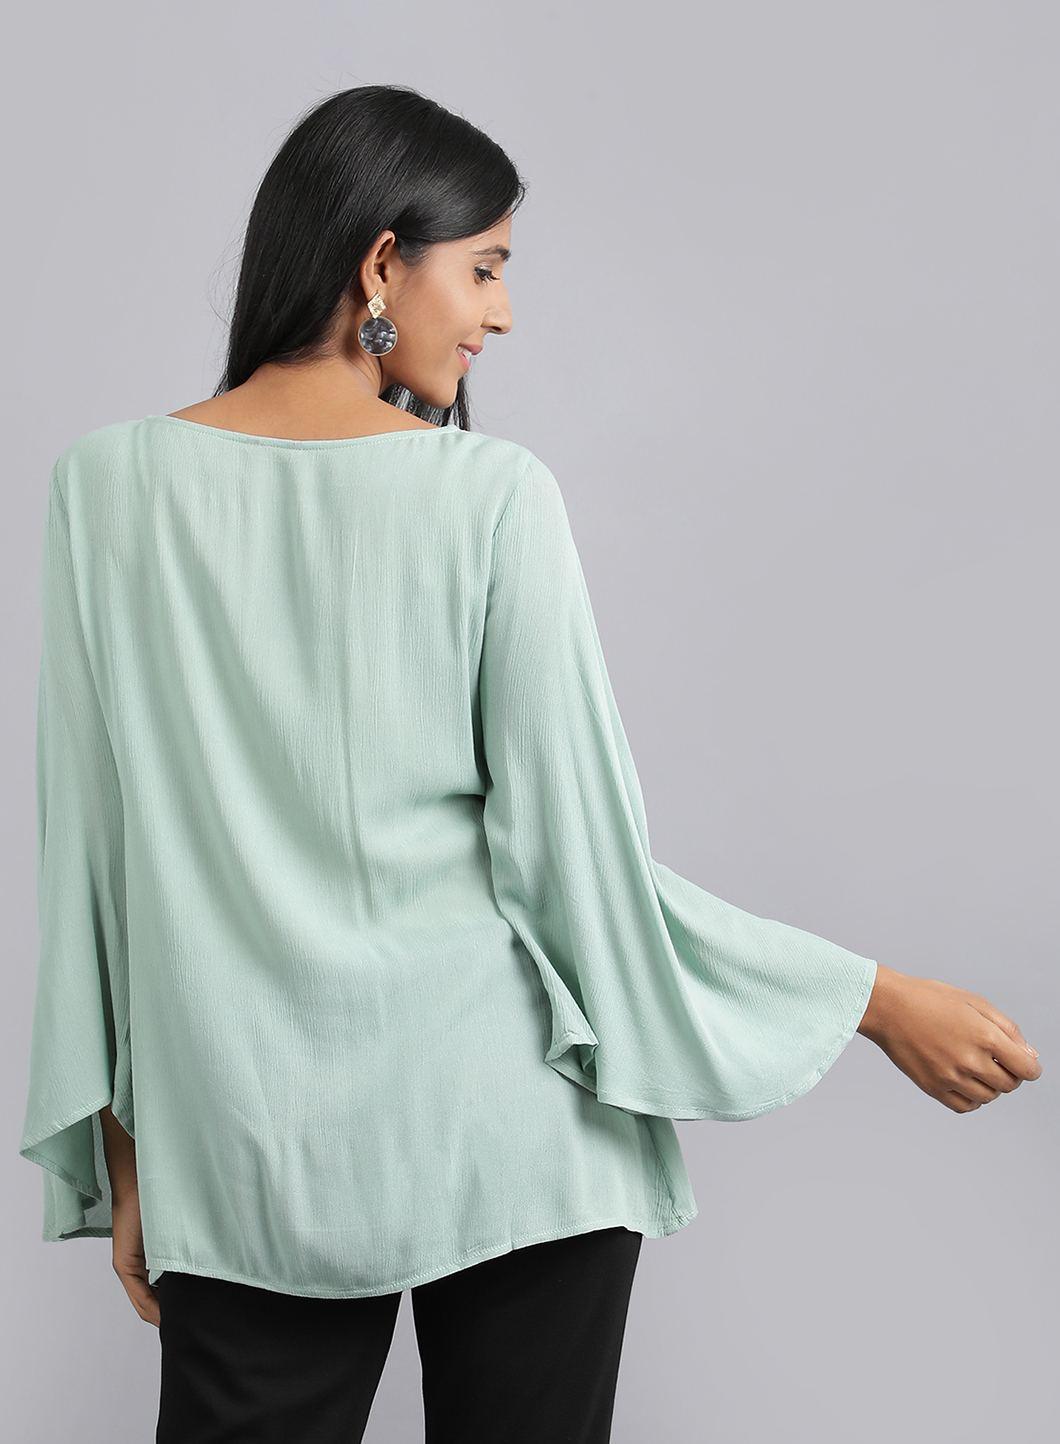 Green Round Neck Floral Top - wforwoman